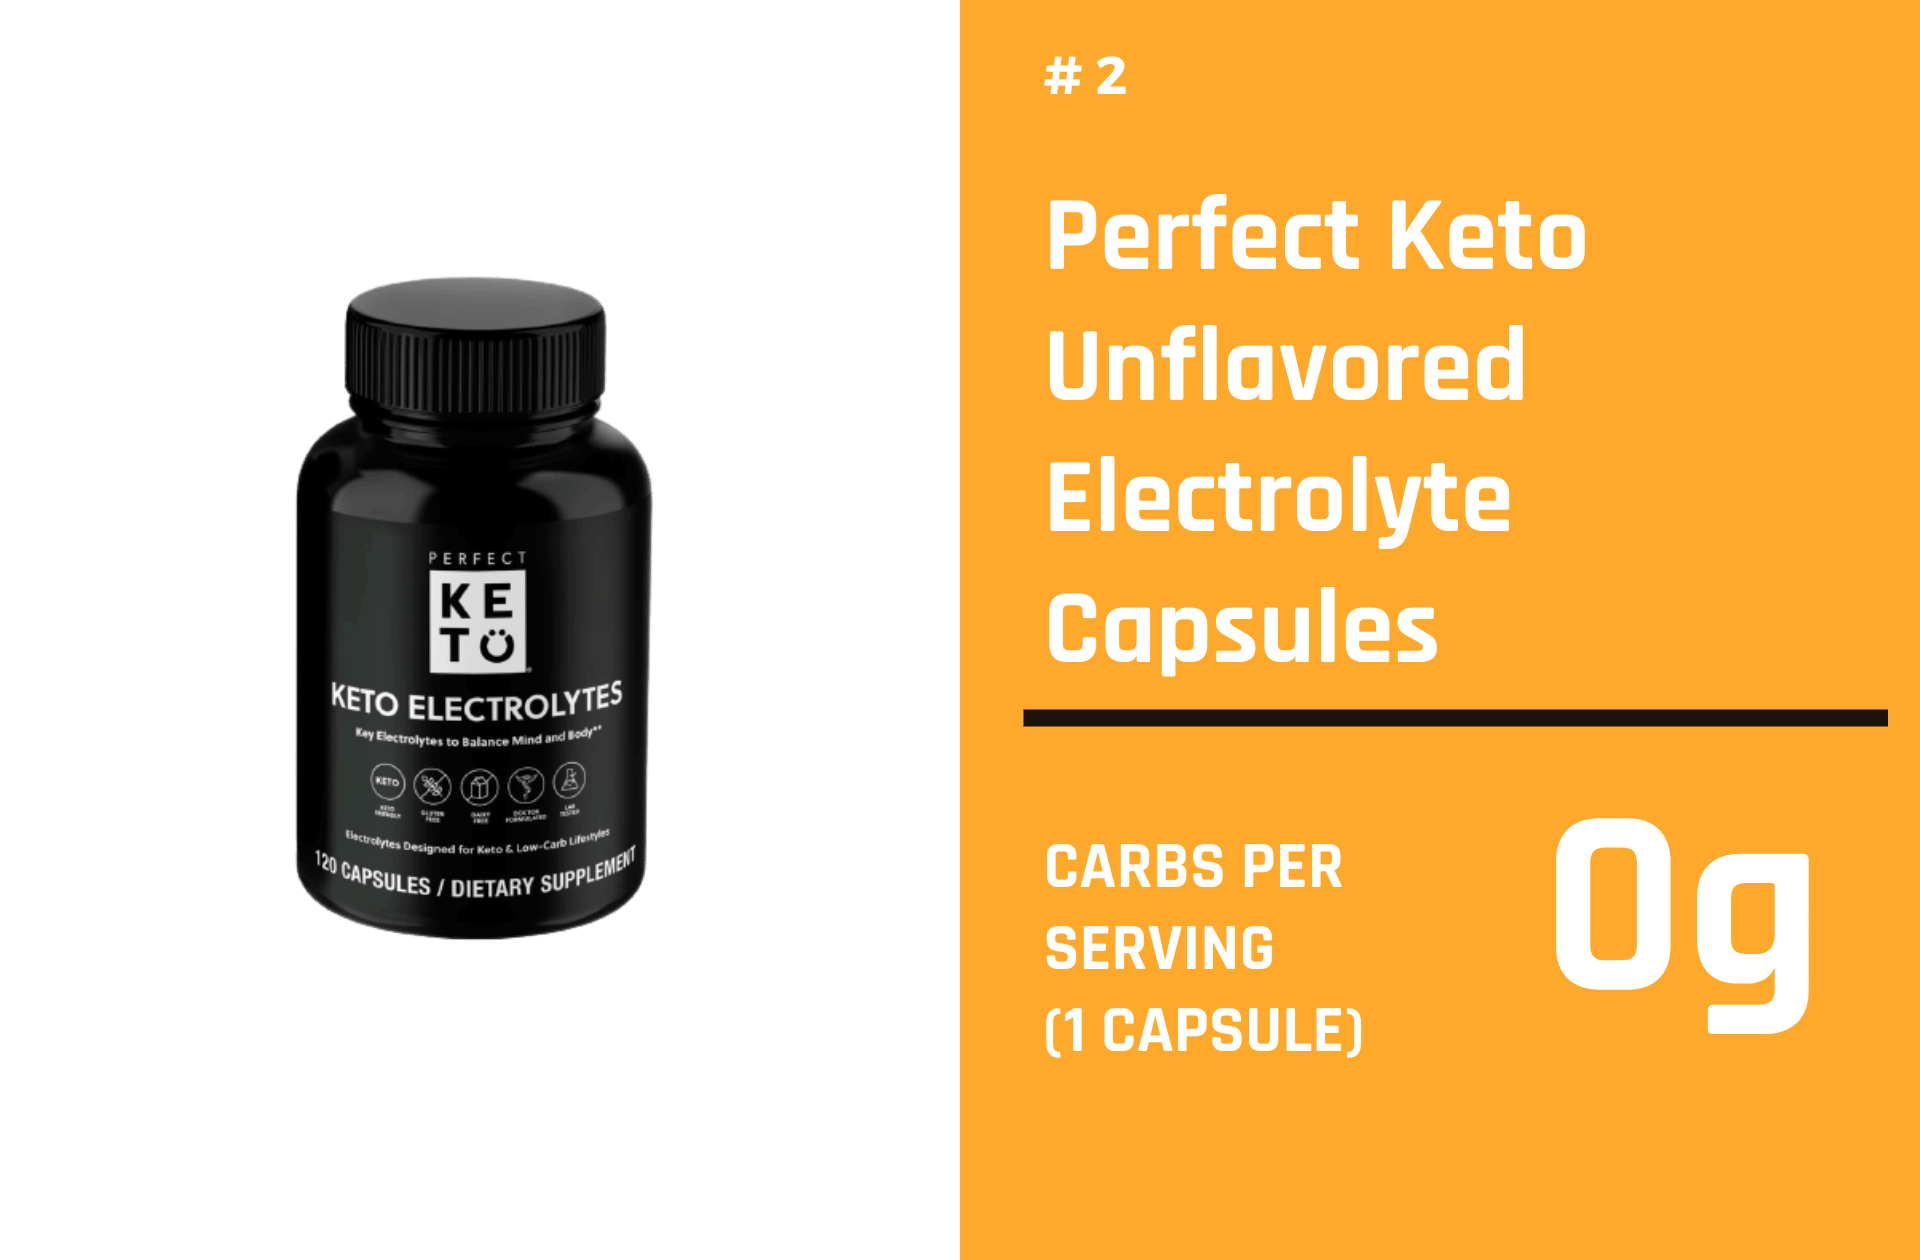 Perfect Keto Unflavored Electrolyte Capsules